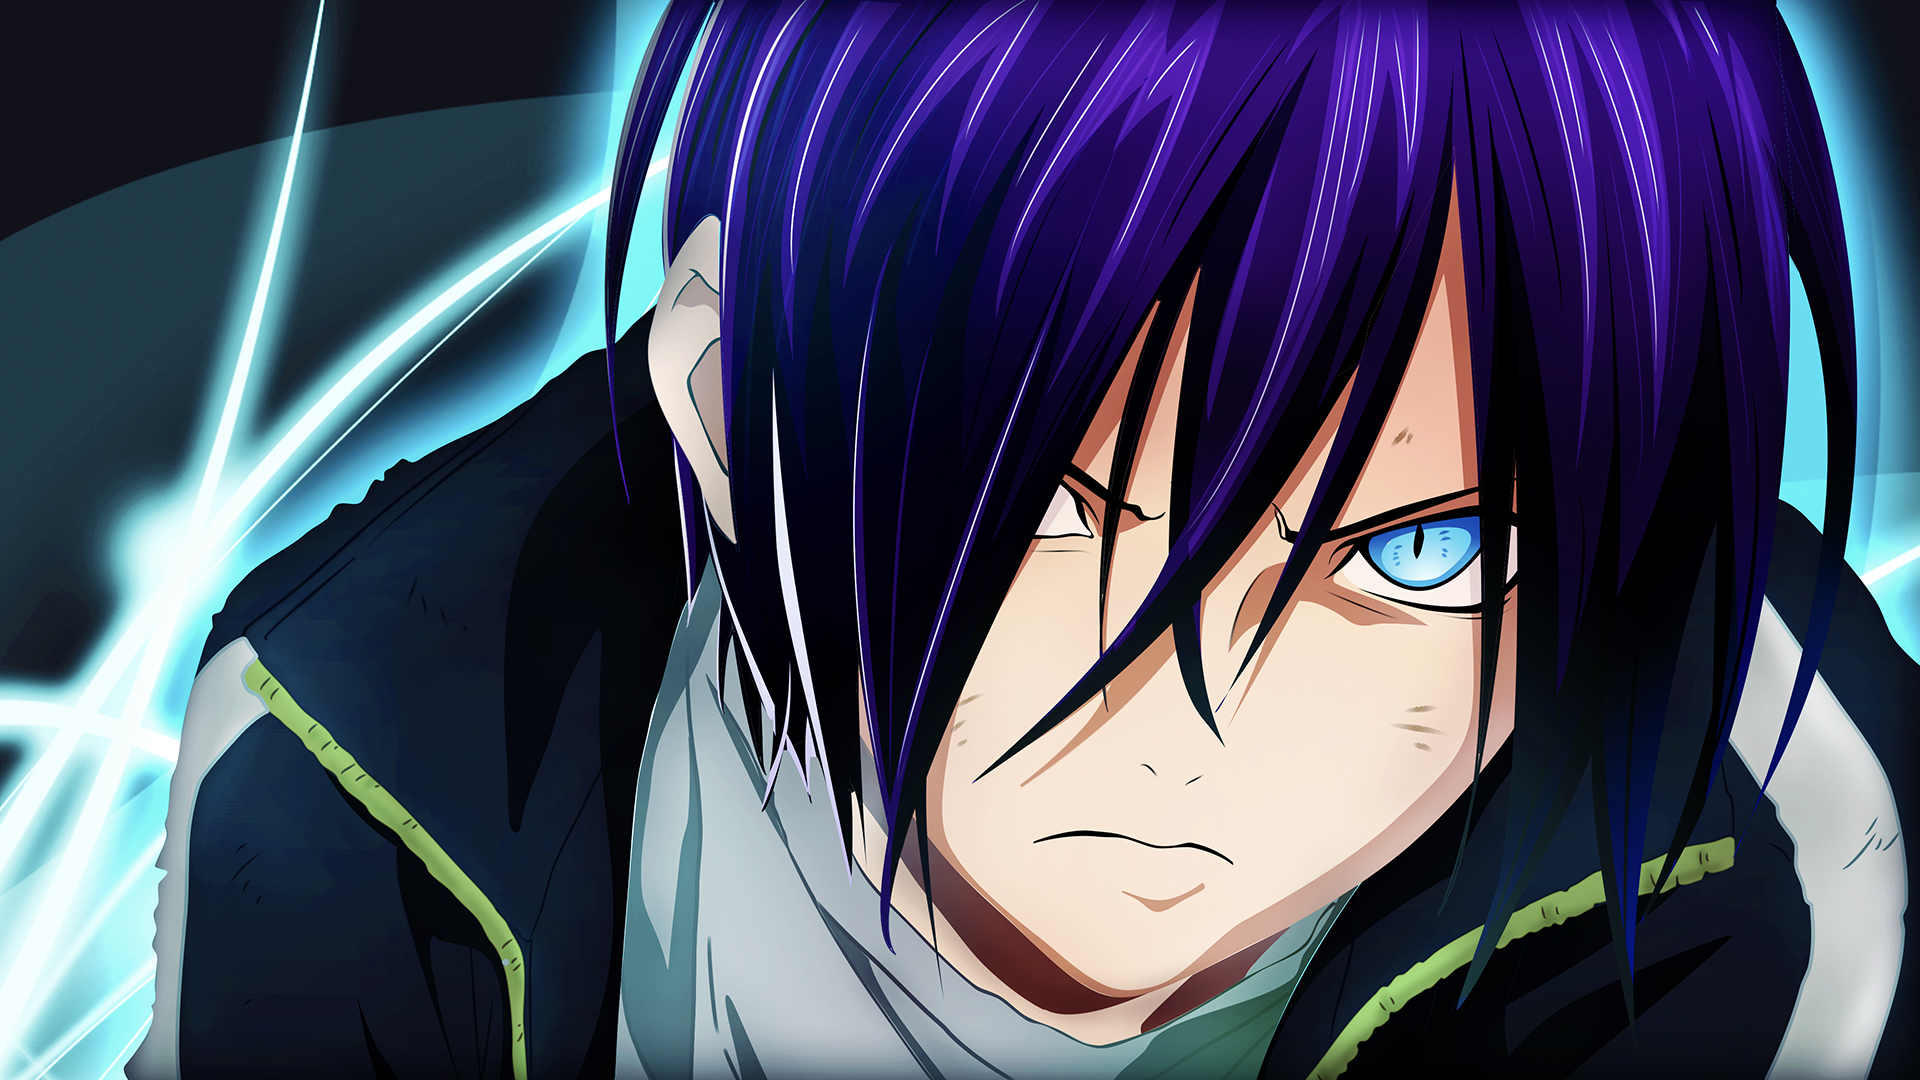 2. Yato from Noragami - wide 1